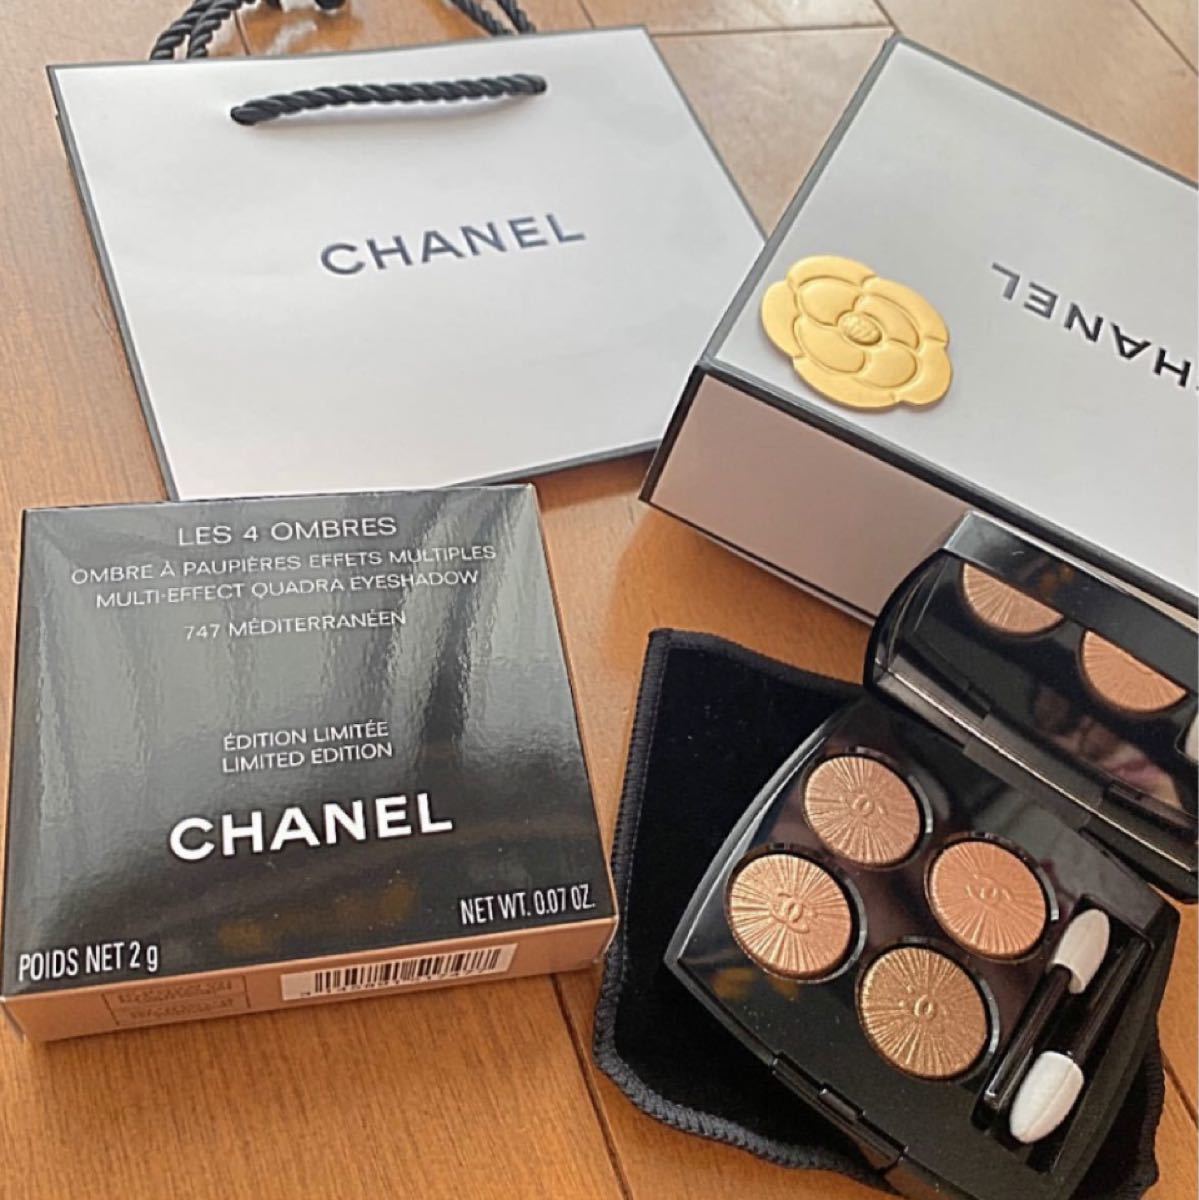 CHANEL LES 4 OMBRES 0.07 LIMITED-EDITION EYESHADOW #747